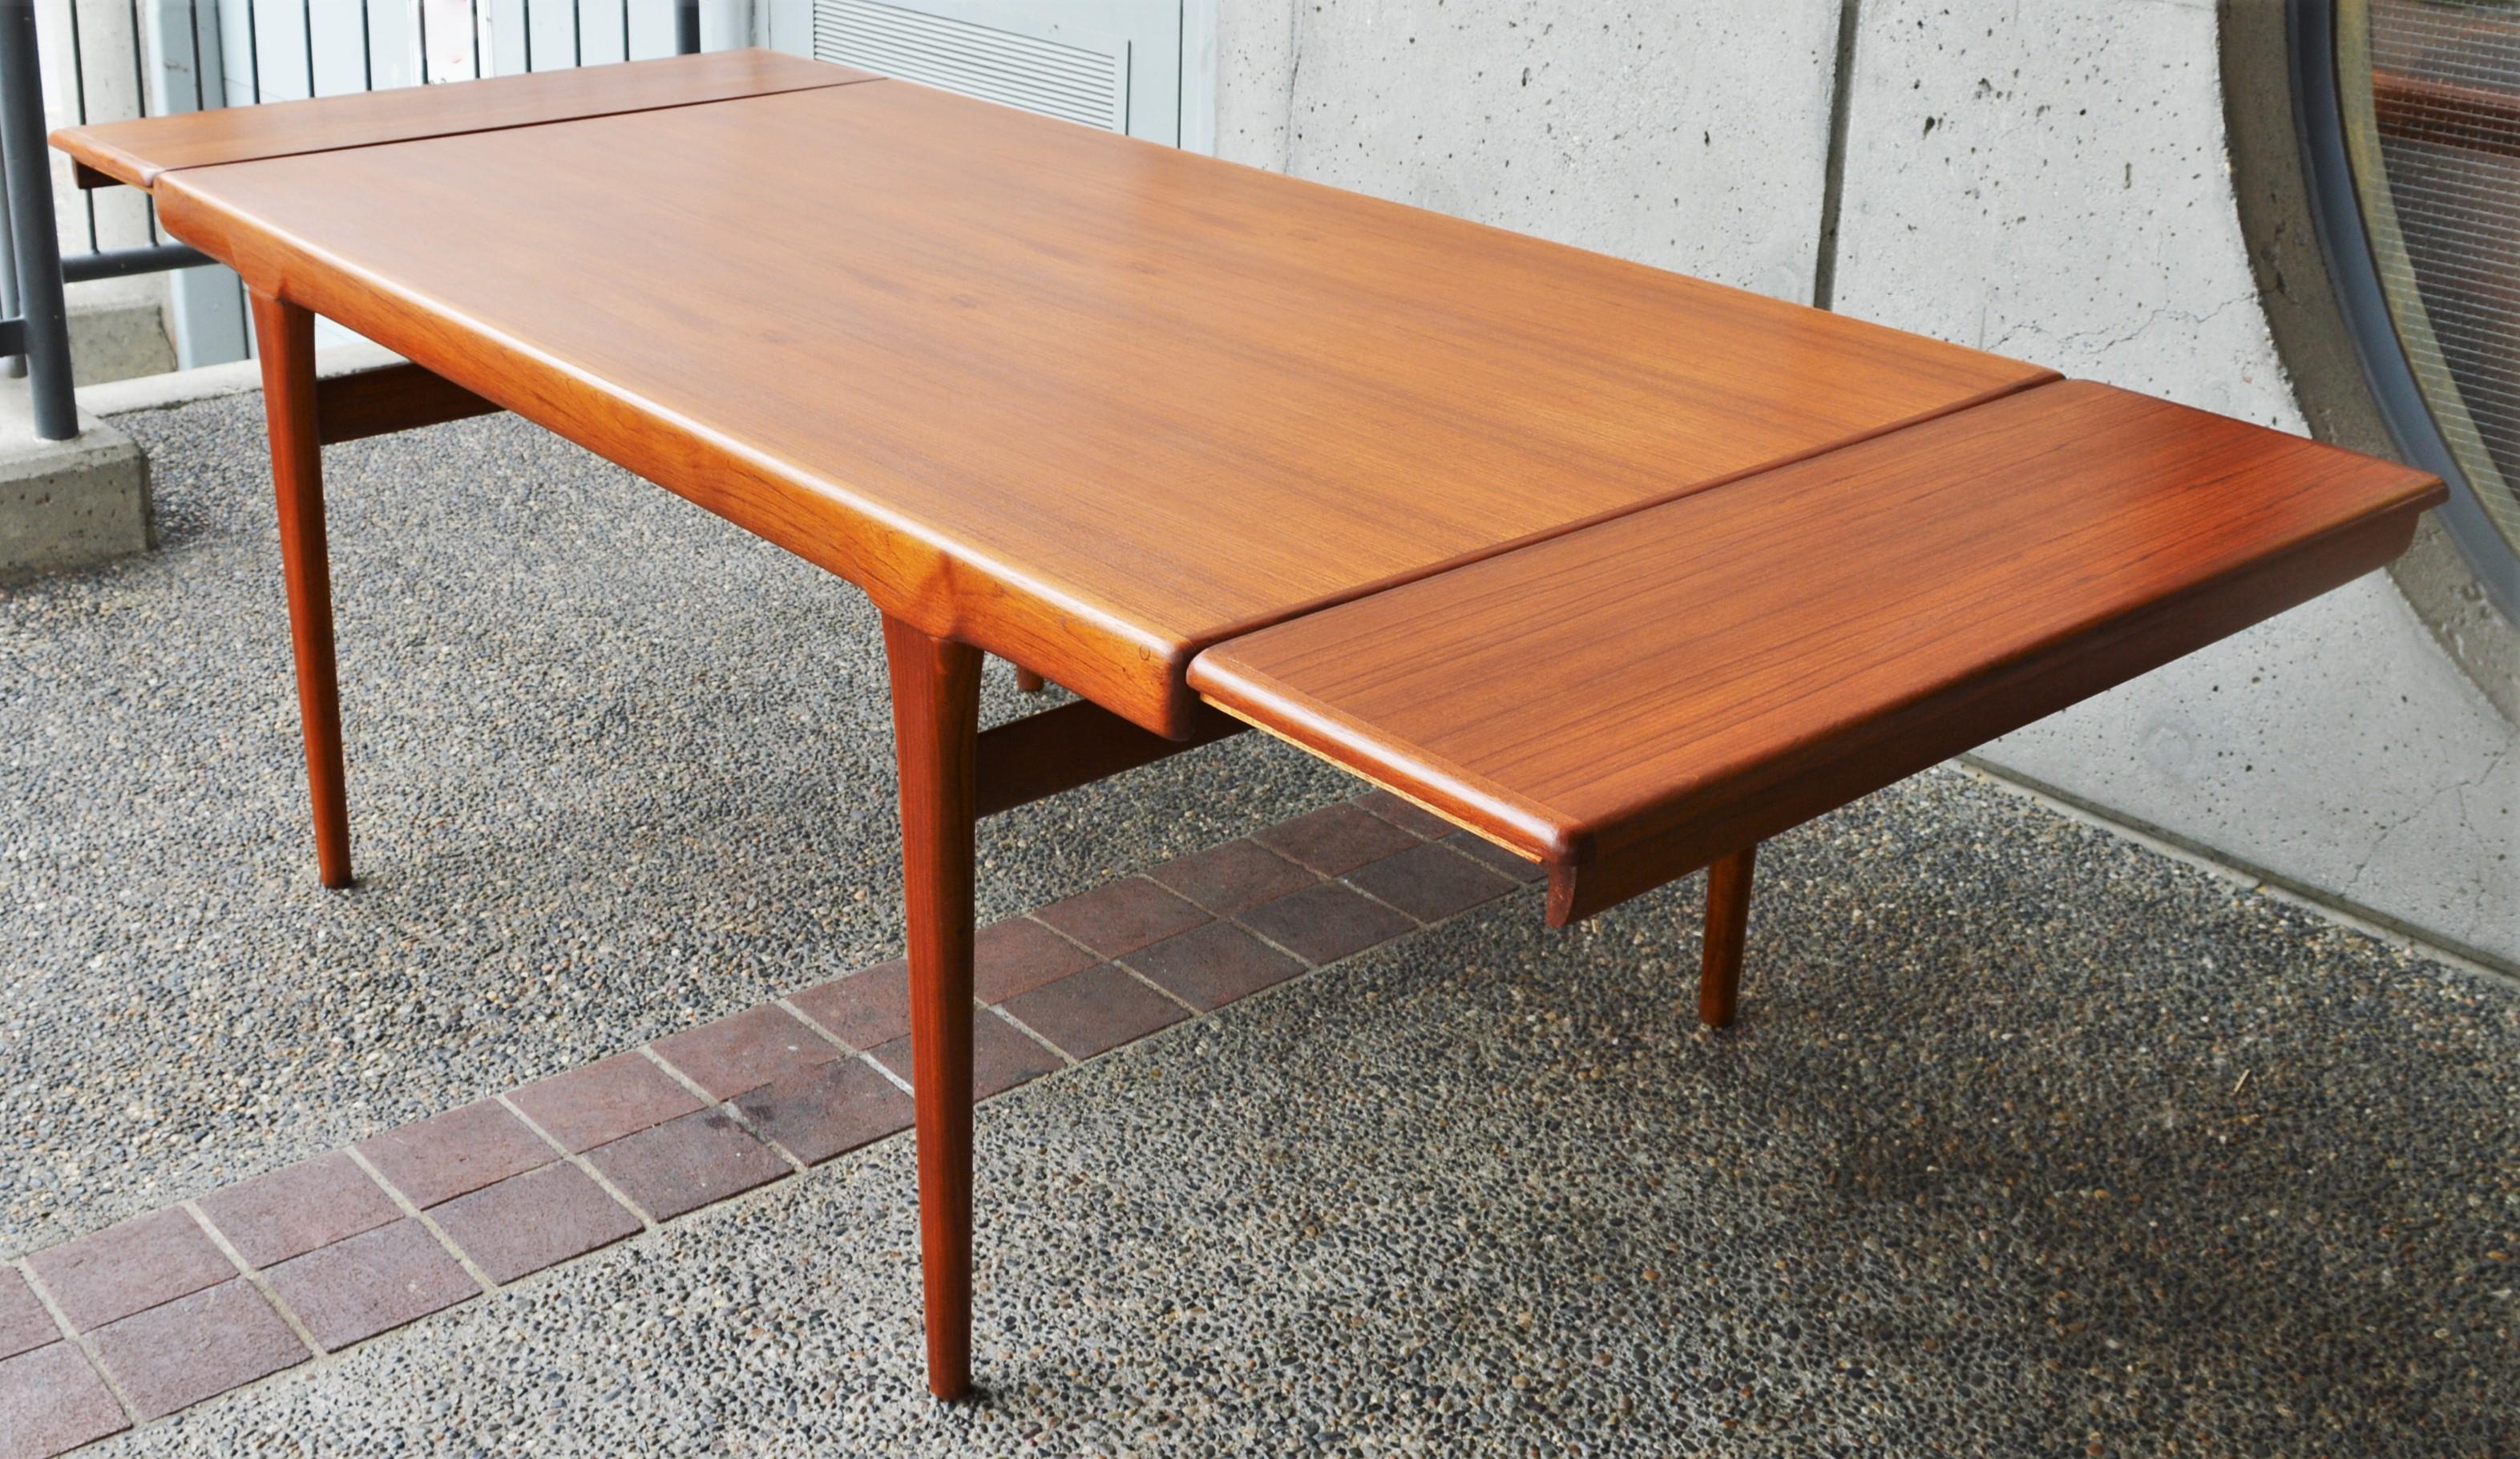 This stunning quality Danish modern teak dining table was designed by Ib Kofod Larsen in the 1960s. Note the sultry thick top edge that contours to flare into the sword blade legs, the curved ends, the ovoid cross braces between the legs, and the